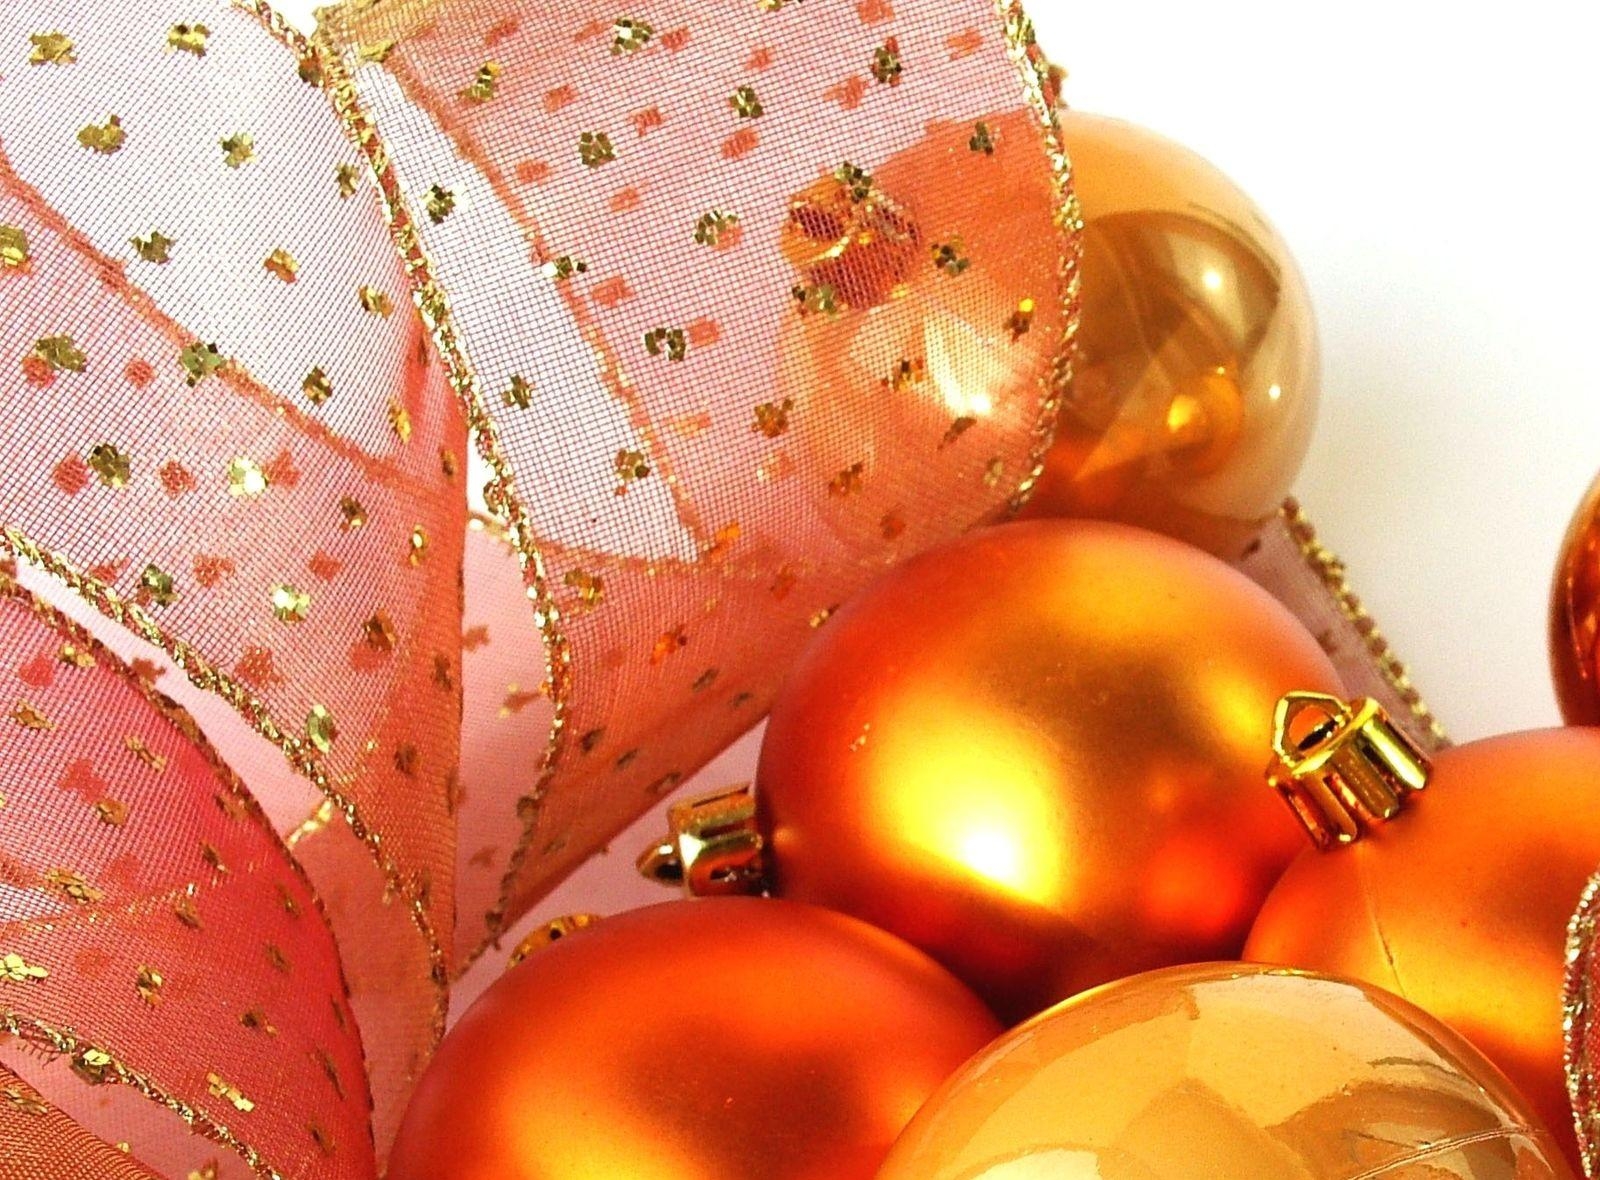 Cool Backgrounds gold, holidays, tape, christmas decorations Close-Up